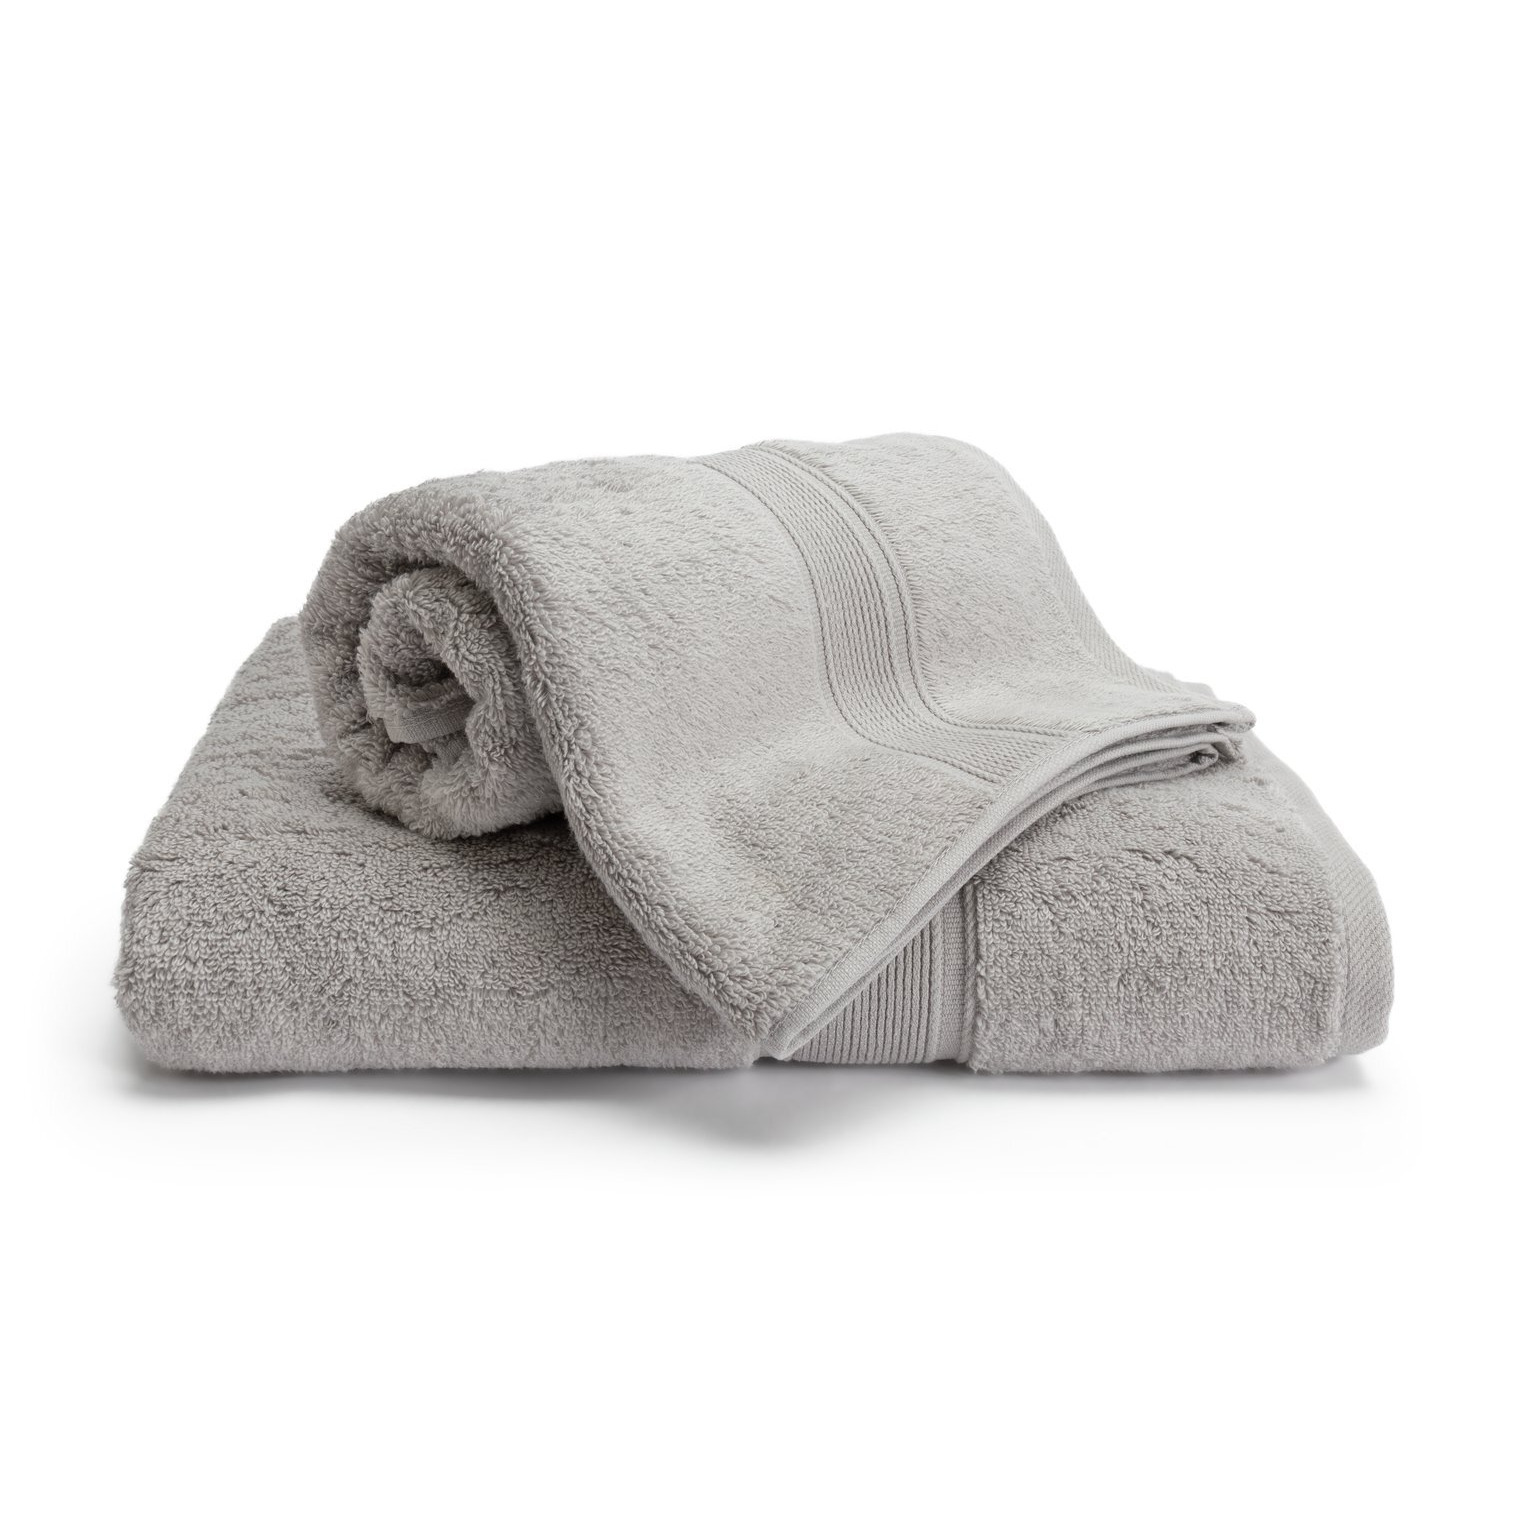 Habitat Cotton Supersoft 2 Pack Hand Towel - Silver - image 1